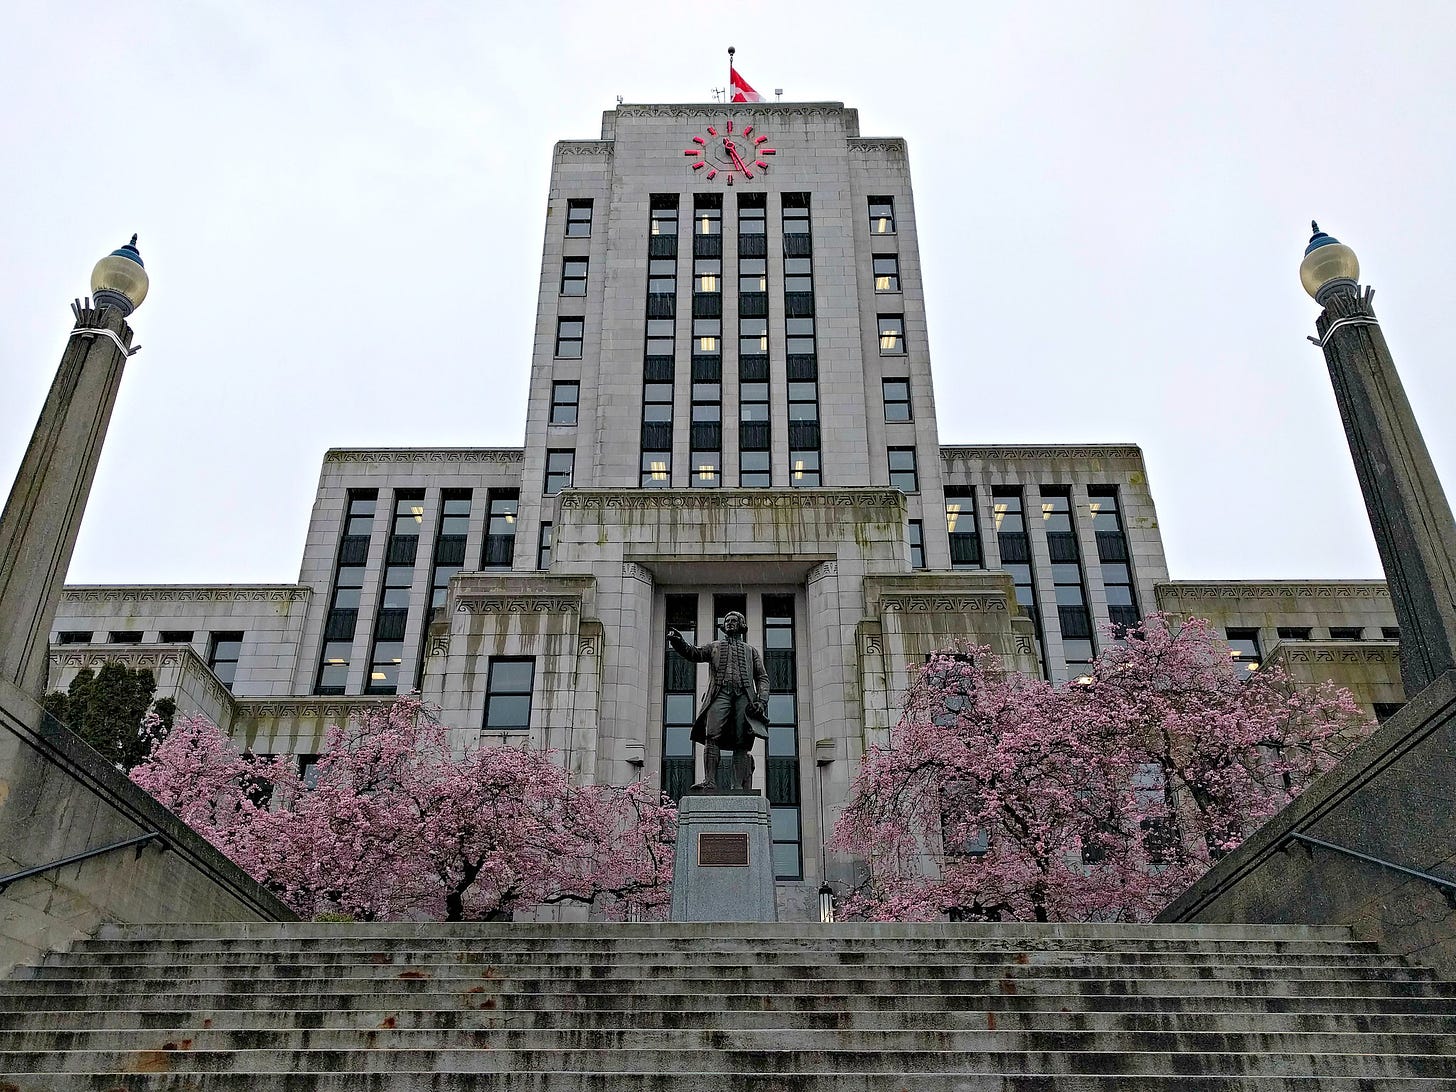 Vancouver City Hall looms in front of the viewer. The shot is taken from the bottom of the stairs in front of city hall, with the statue of, I dunno, some guy in front. Cherry blossoms are blooming around the statue and entrance to city hall